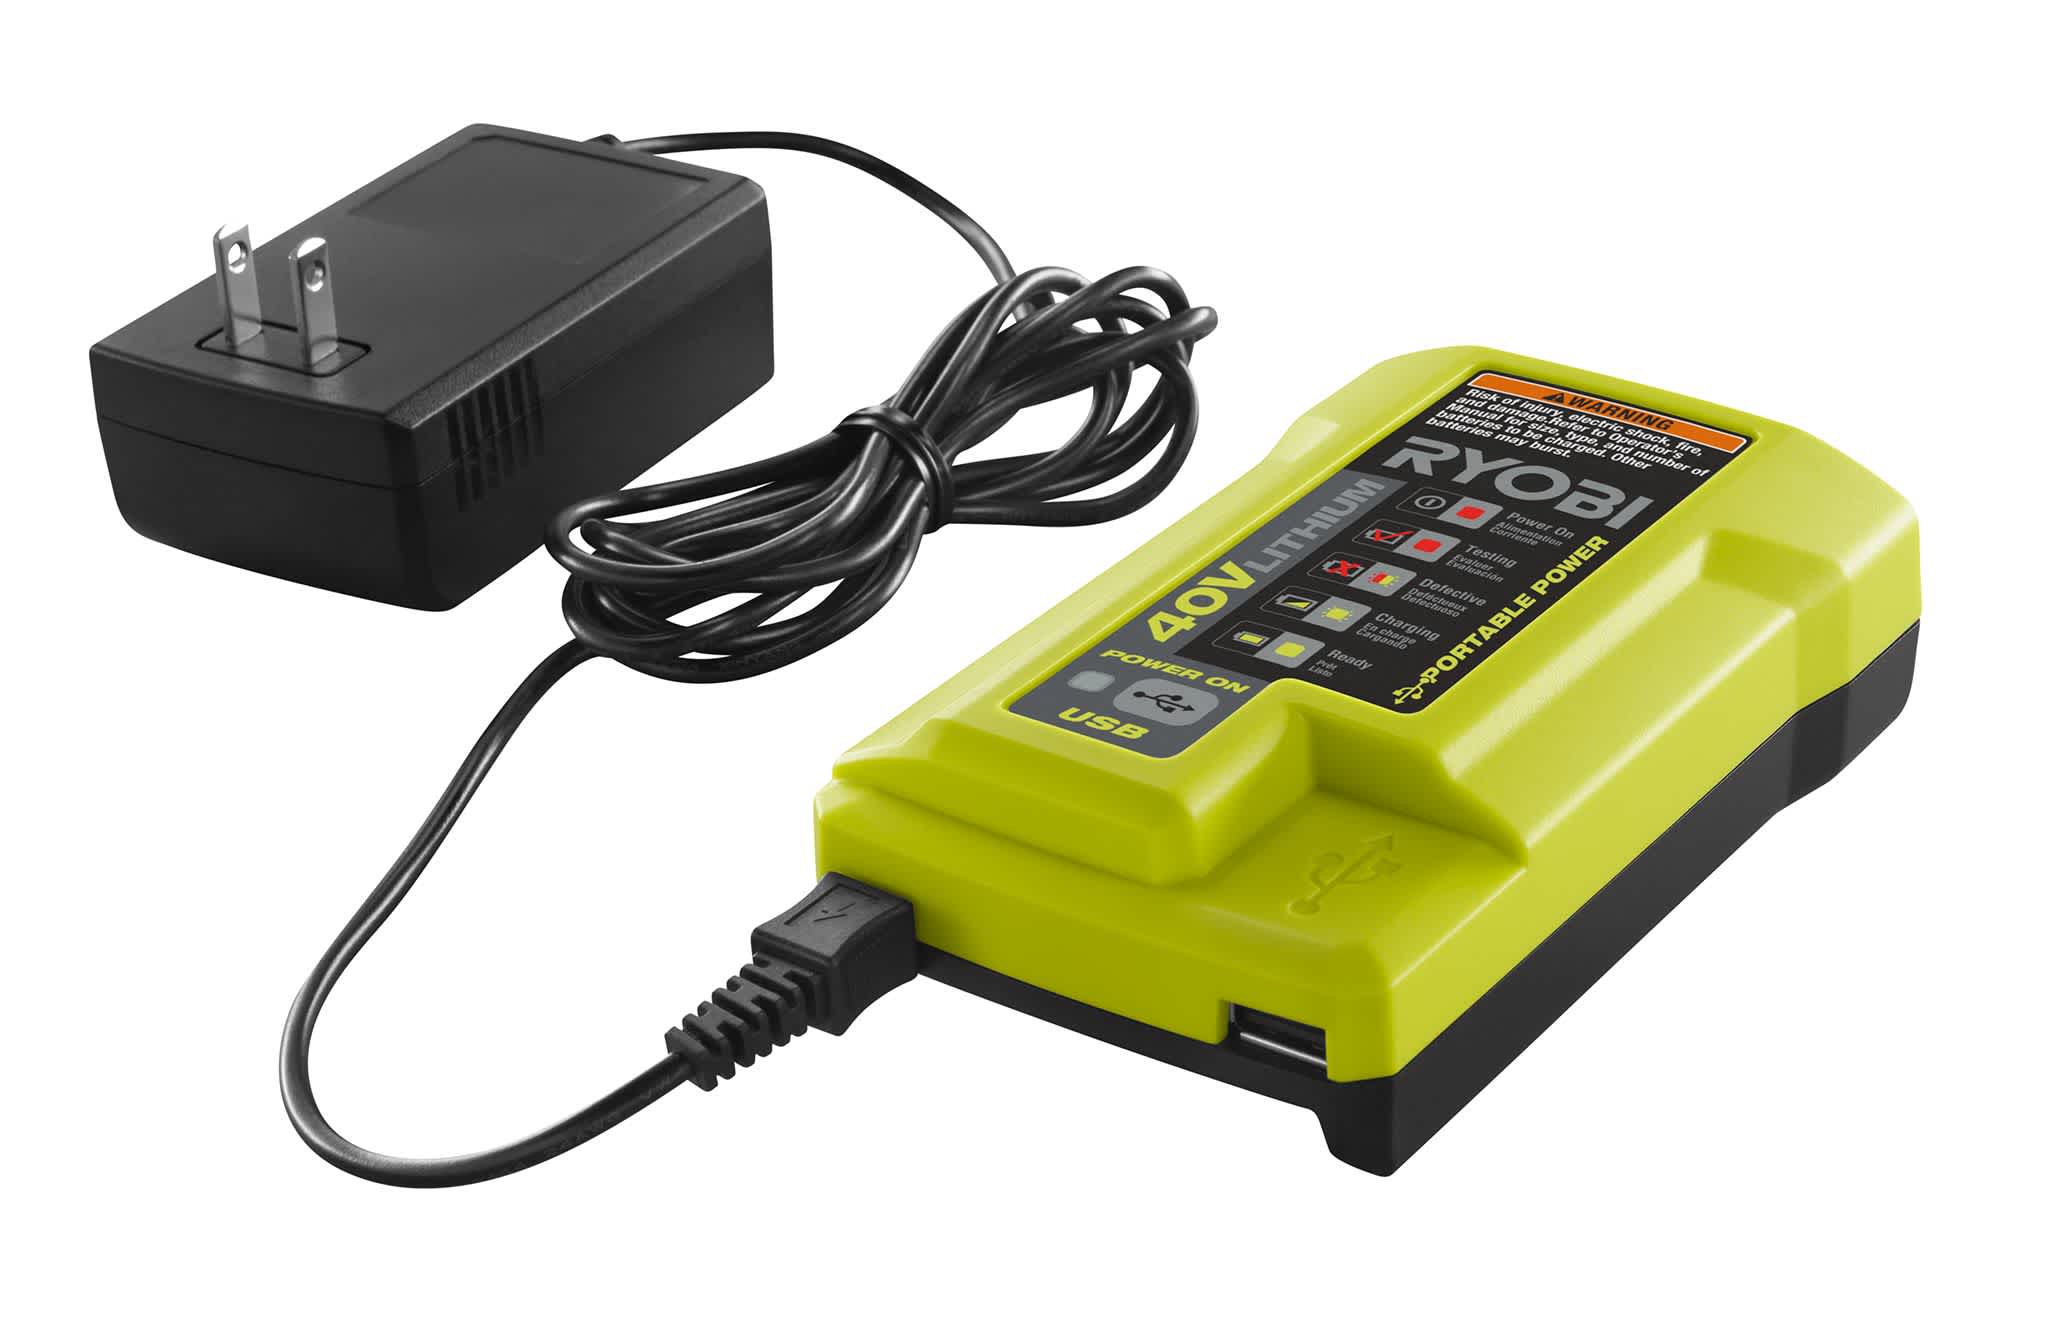 Product Features Image for 40V LITHIUM-ION 6.0AH HIGH CAPACITY BATTERY AND CHARGER KIT.